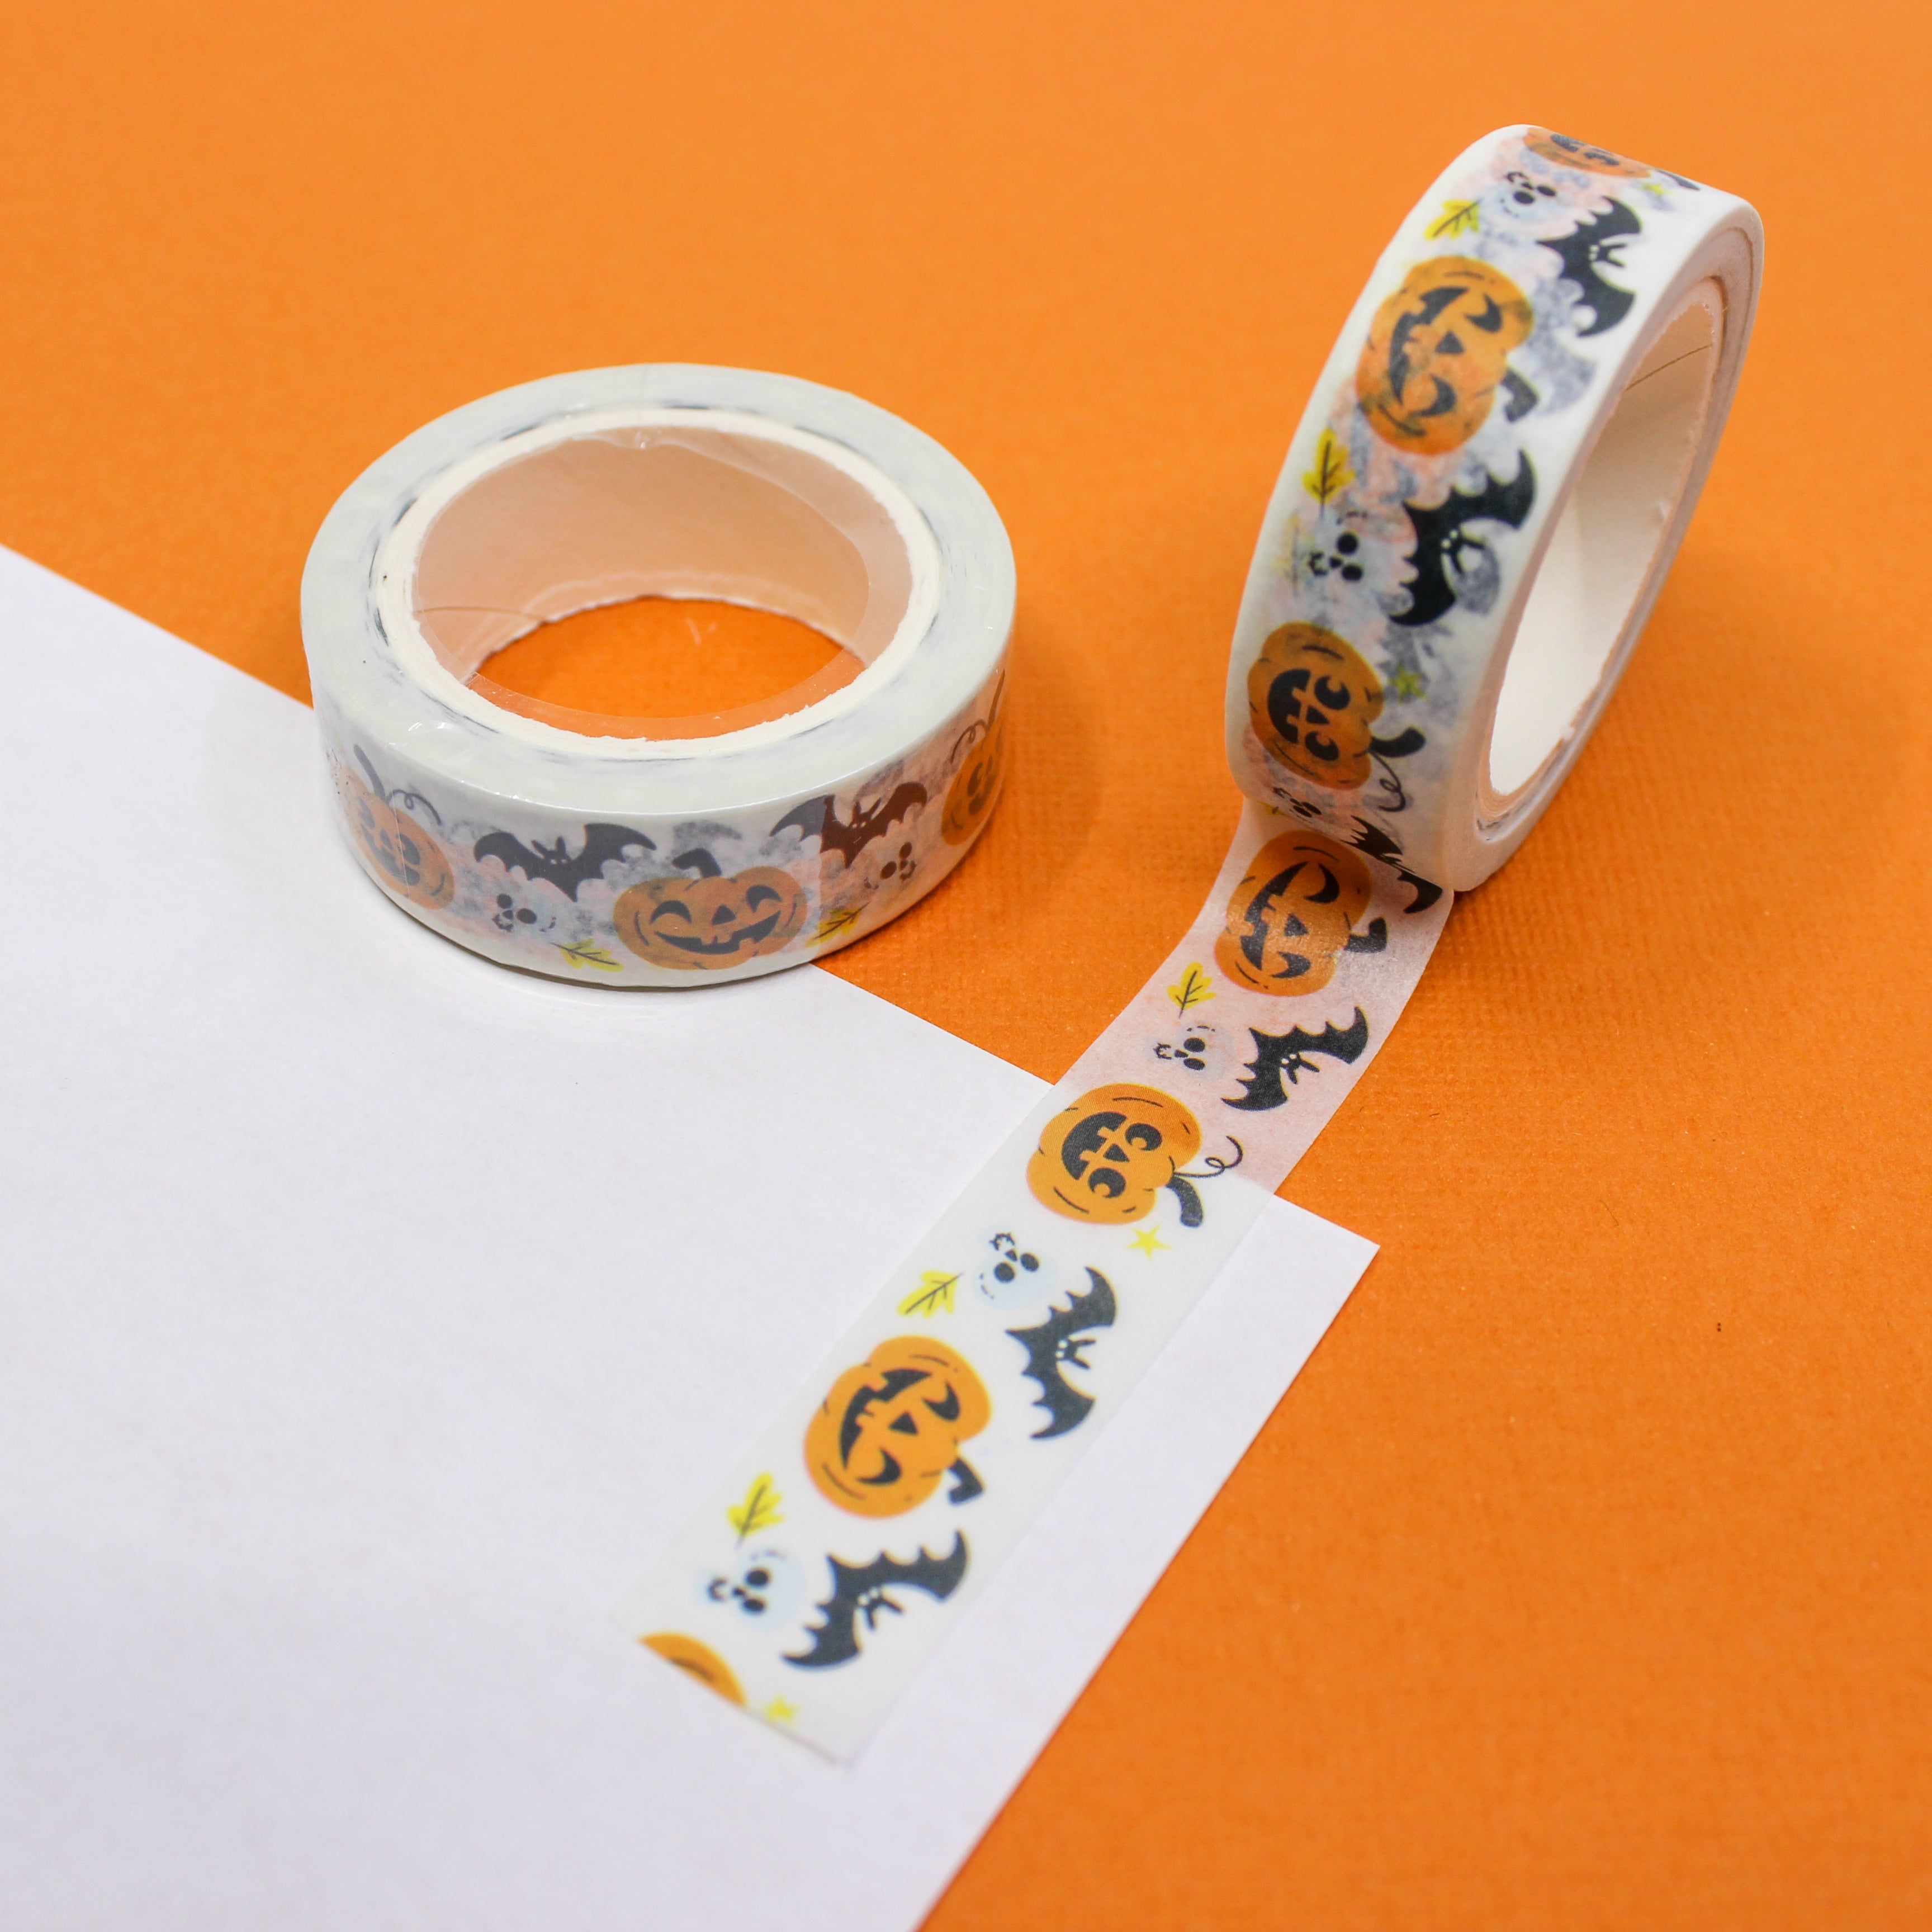 This is a spooky pumpkin and bat  themed washi tape from BBB Supplies Craft Shop